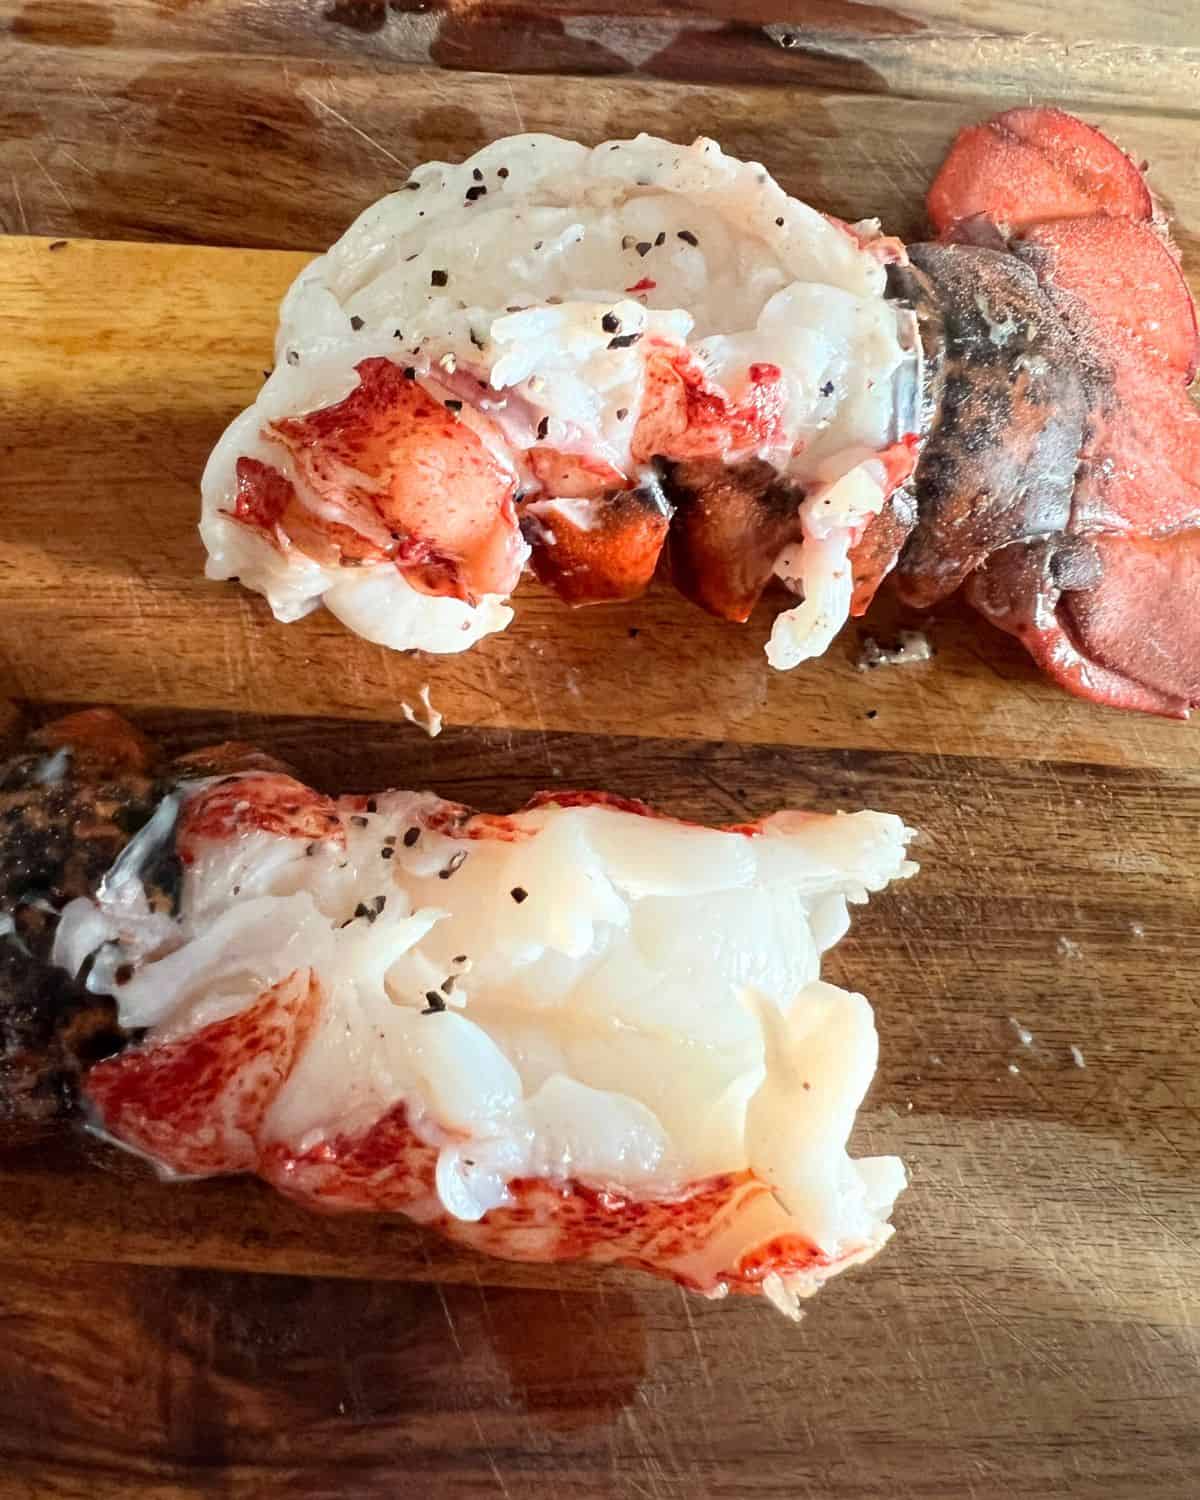 Seasoned smoked lobster tails on a wooden cutting board ready to eat or add to recipes. 